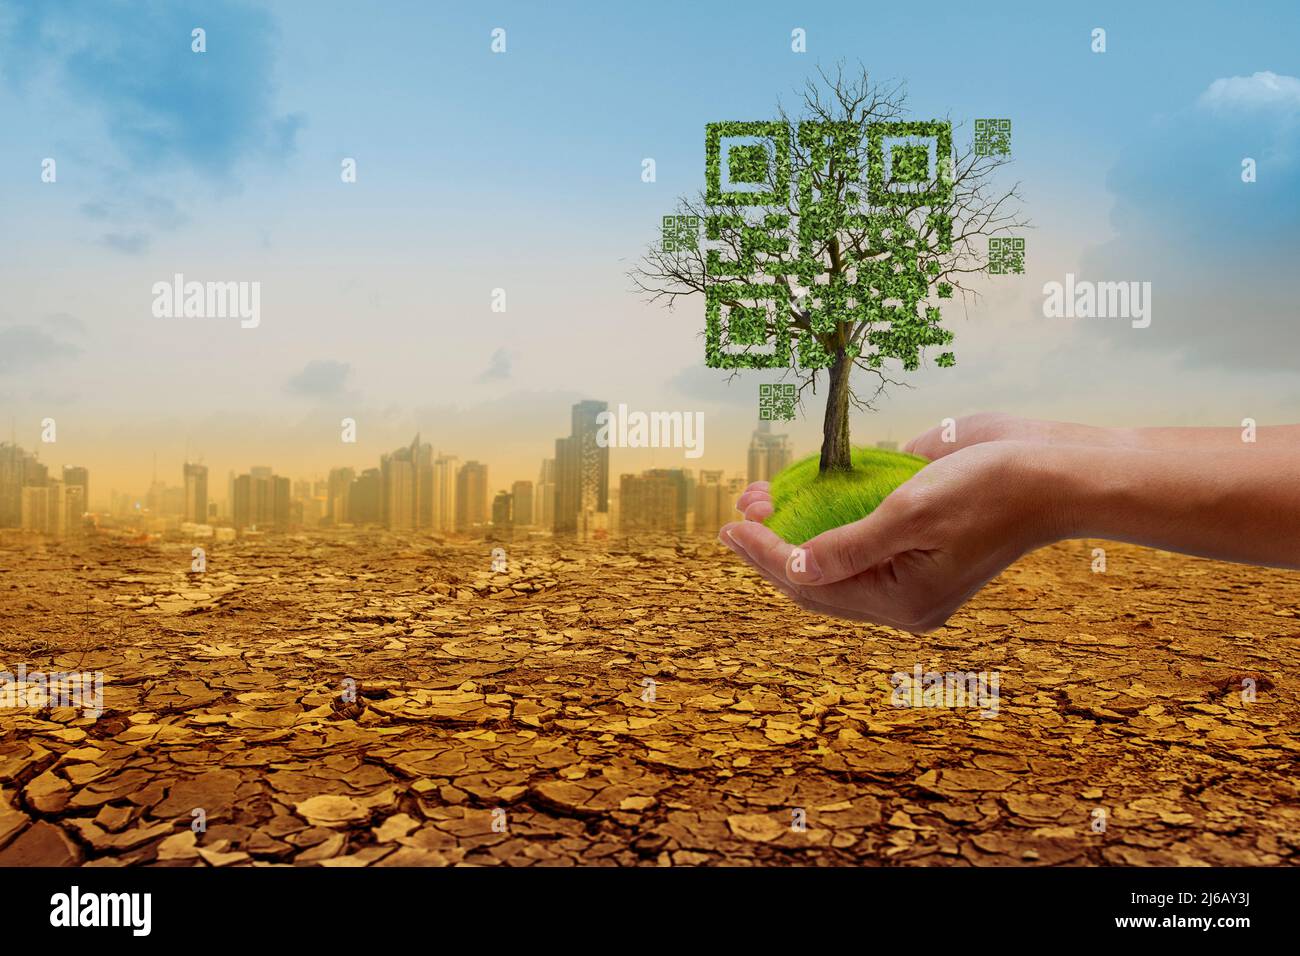 Hands holding dead tree shaped like qrcore in the dry forest and city background. Technology , Business and Nature Concept. Stock Photo